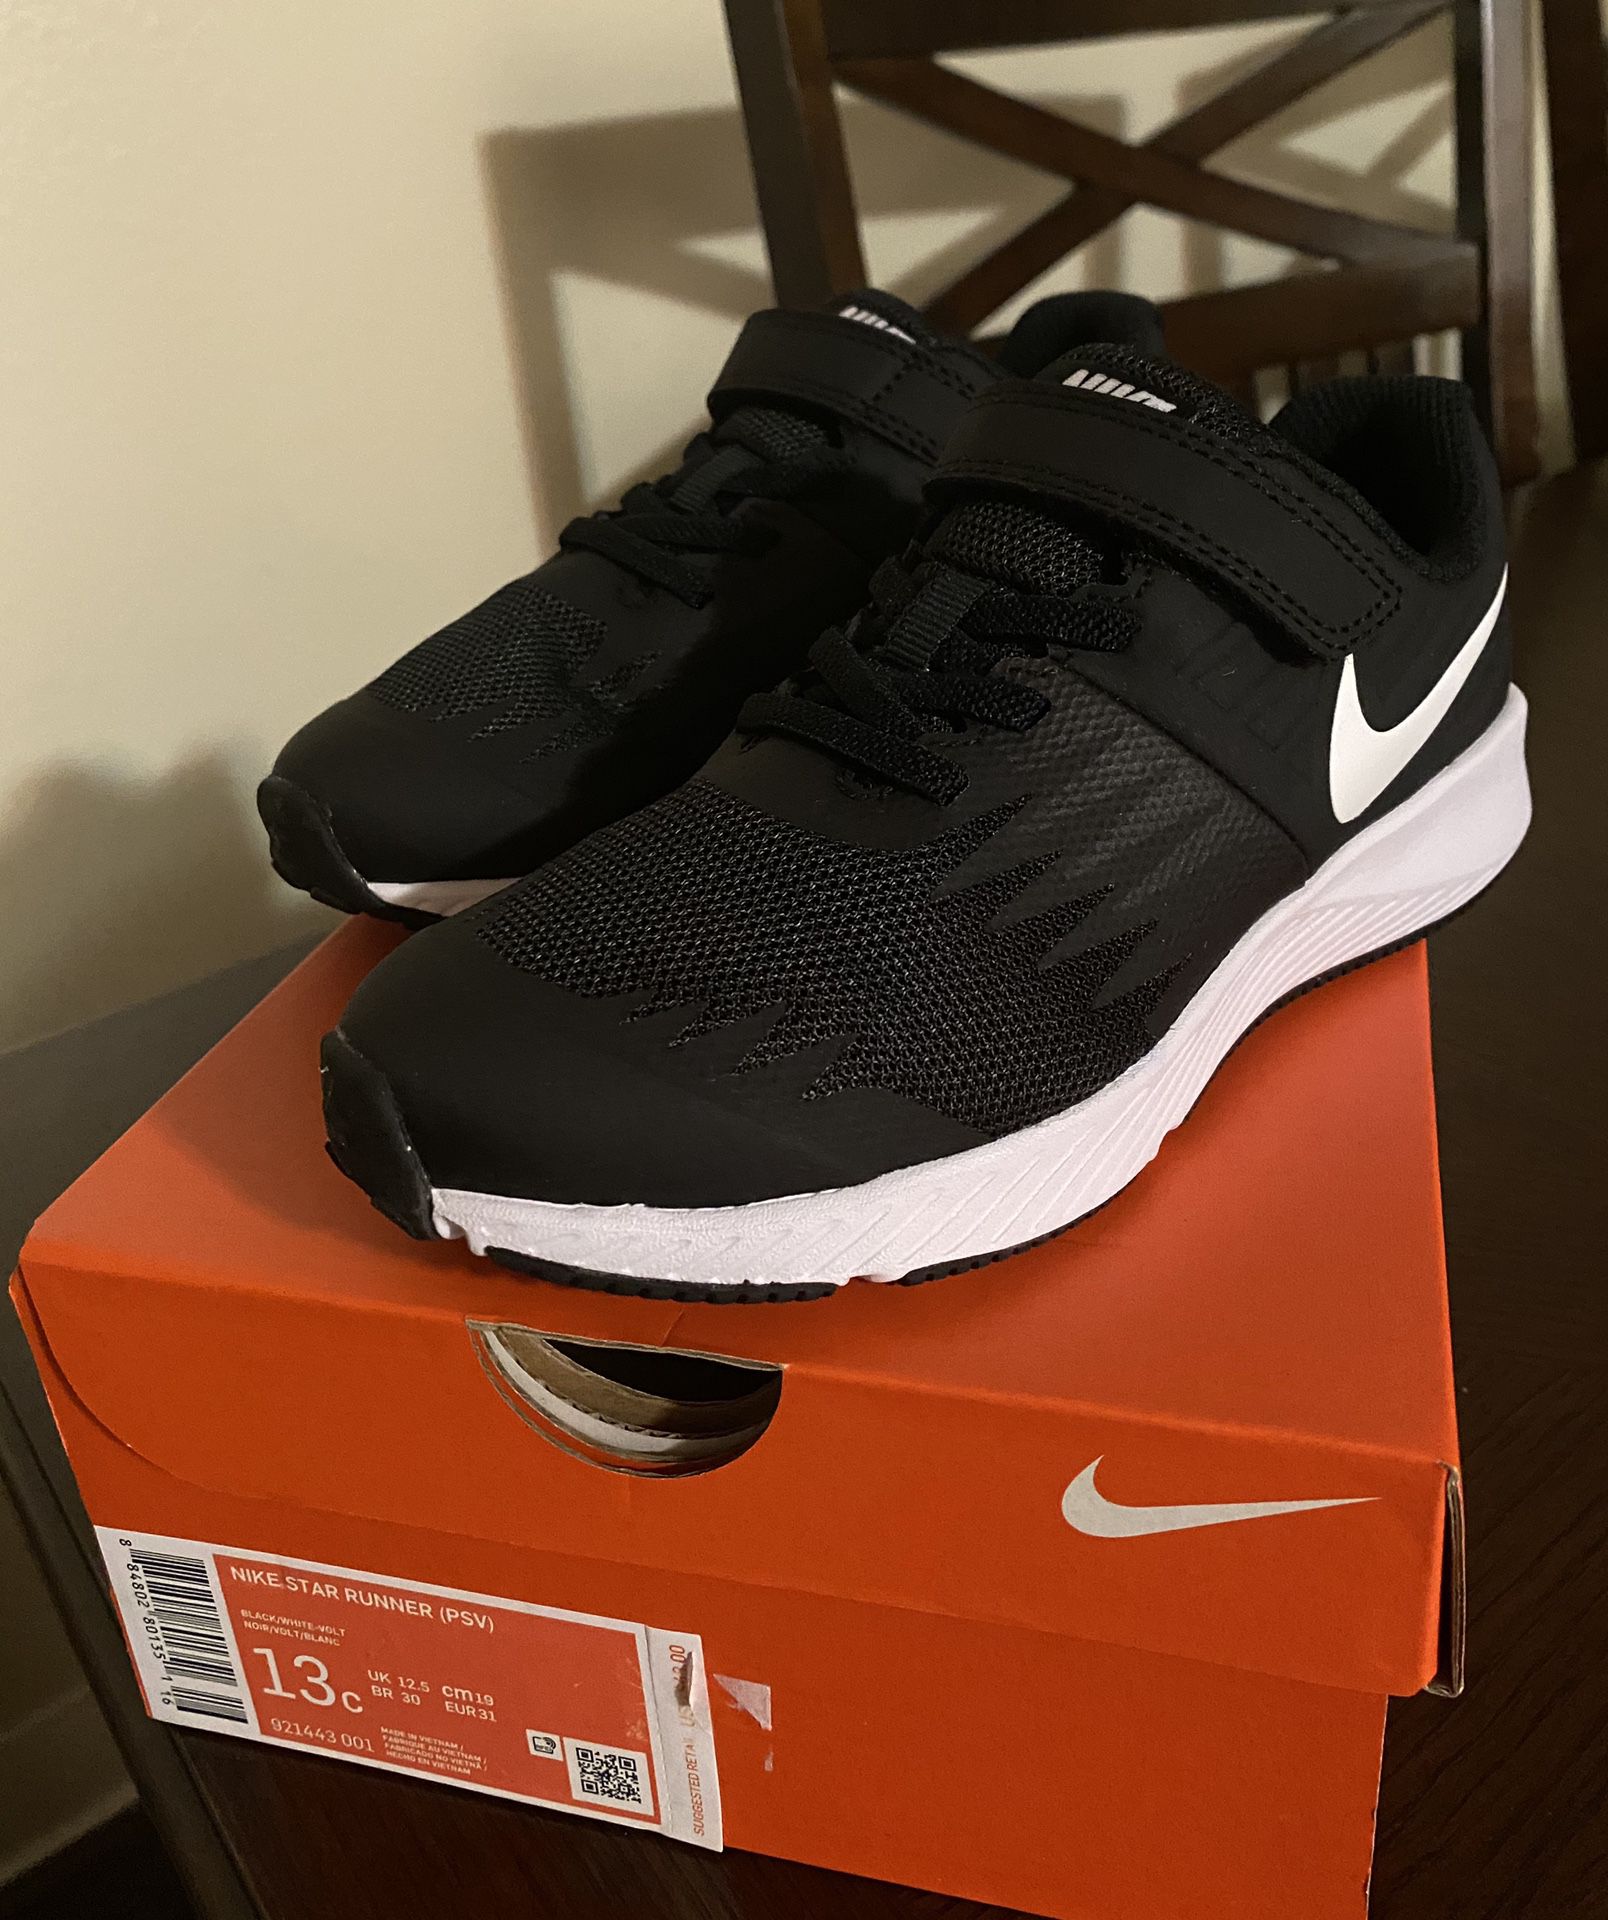 New Nike shoes for boys Size 13c